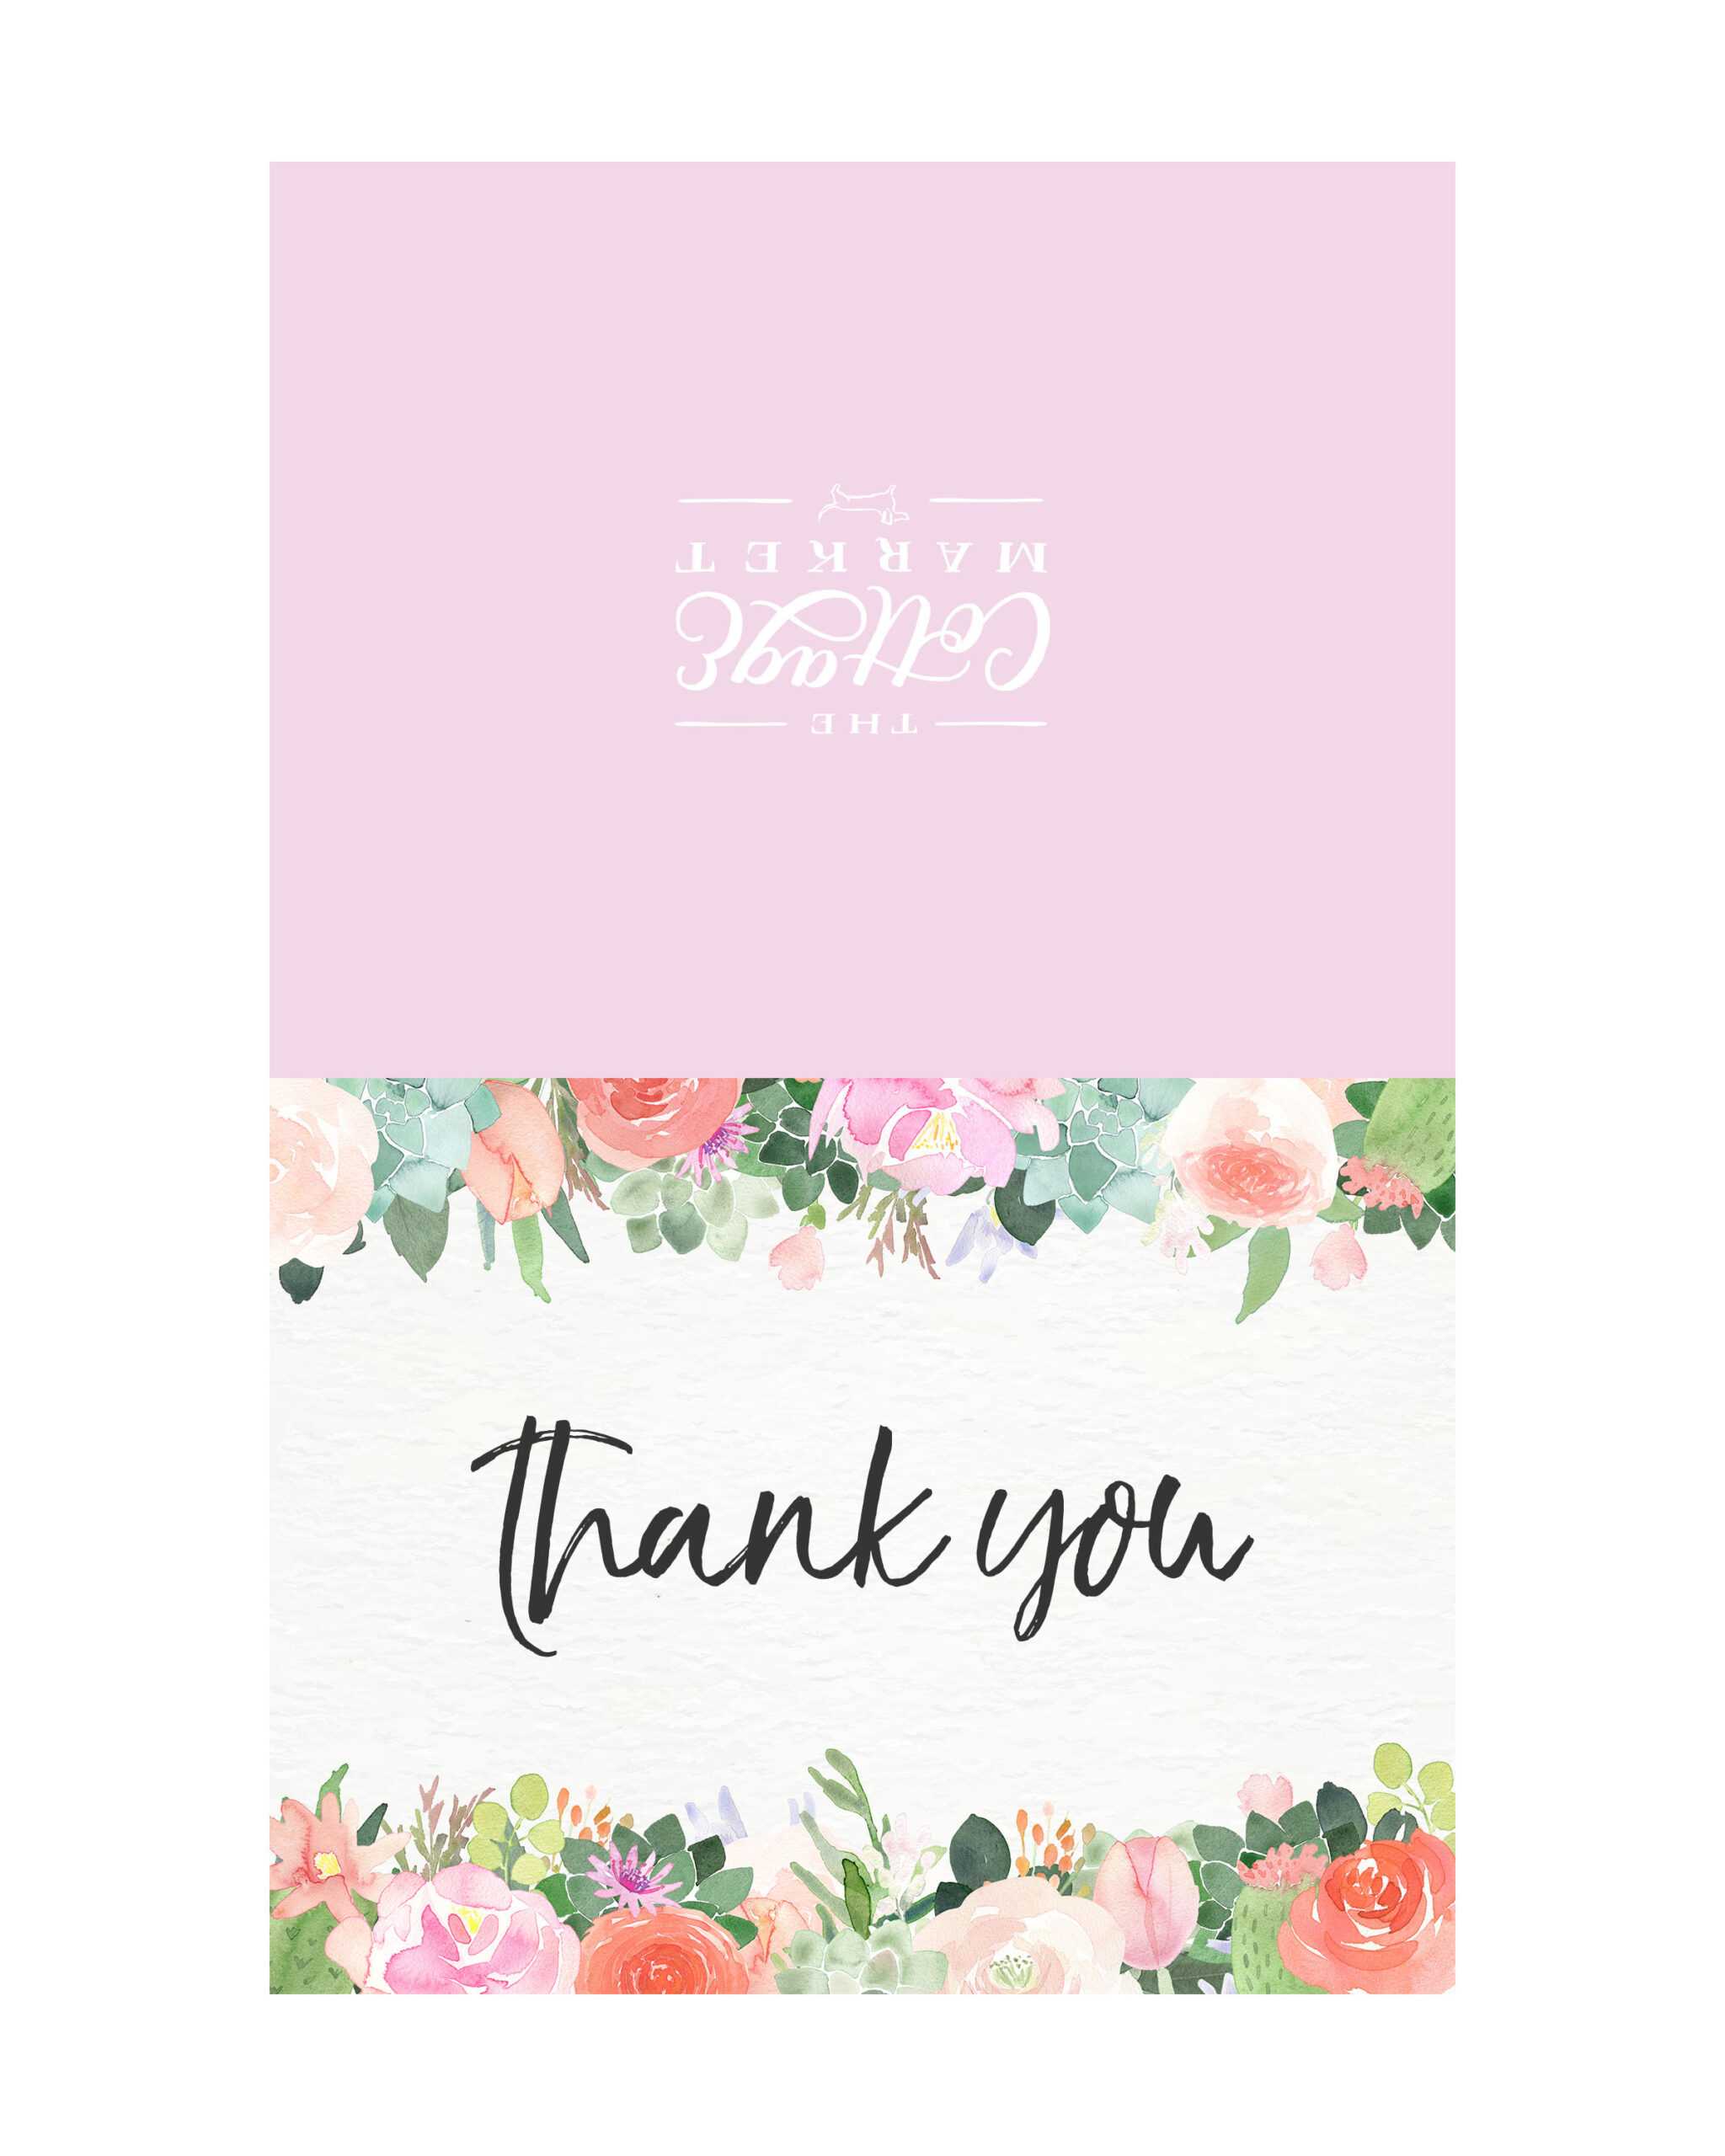 10 Free Printable Thank You Cards You Can't Miss - The Regarding Free Printable Thank You Card Template